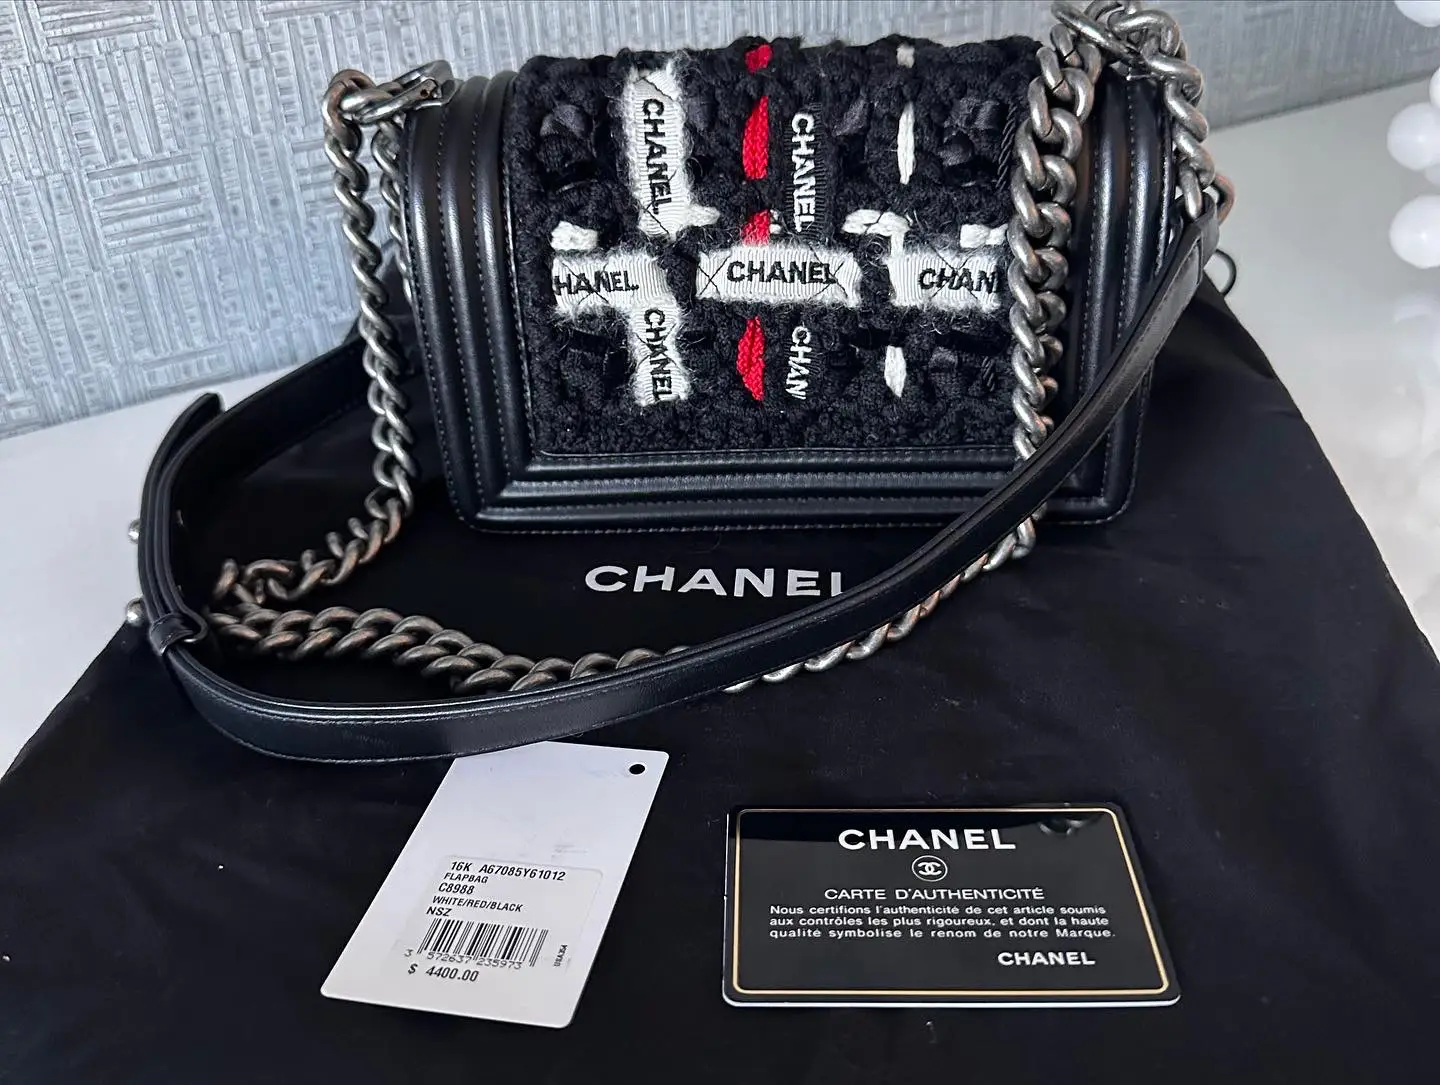 CHANEL LIMITED ED. Handbag for sale, Gallery posted by PeacockDesign🦚